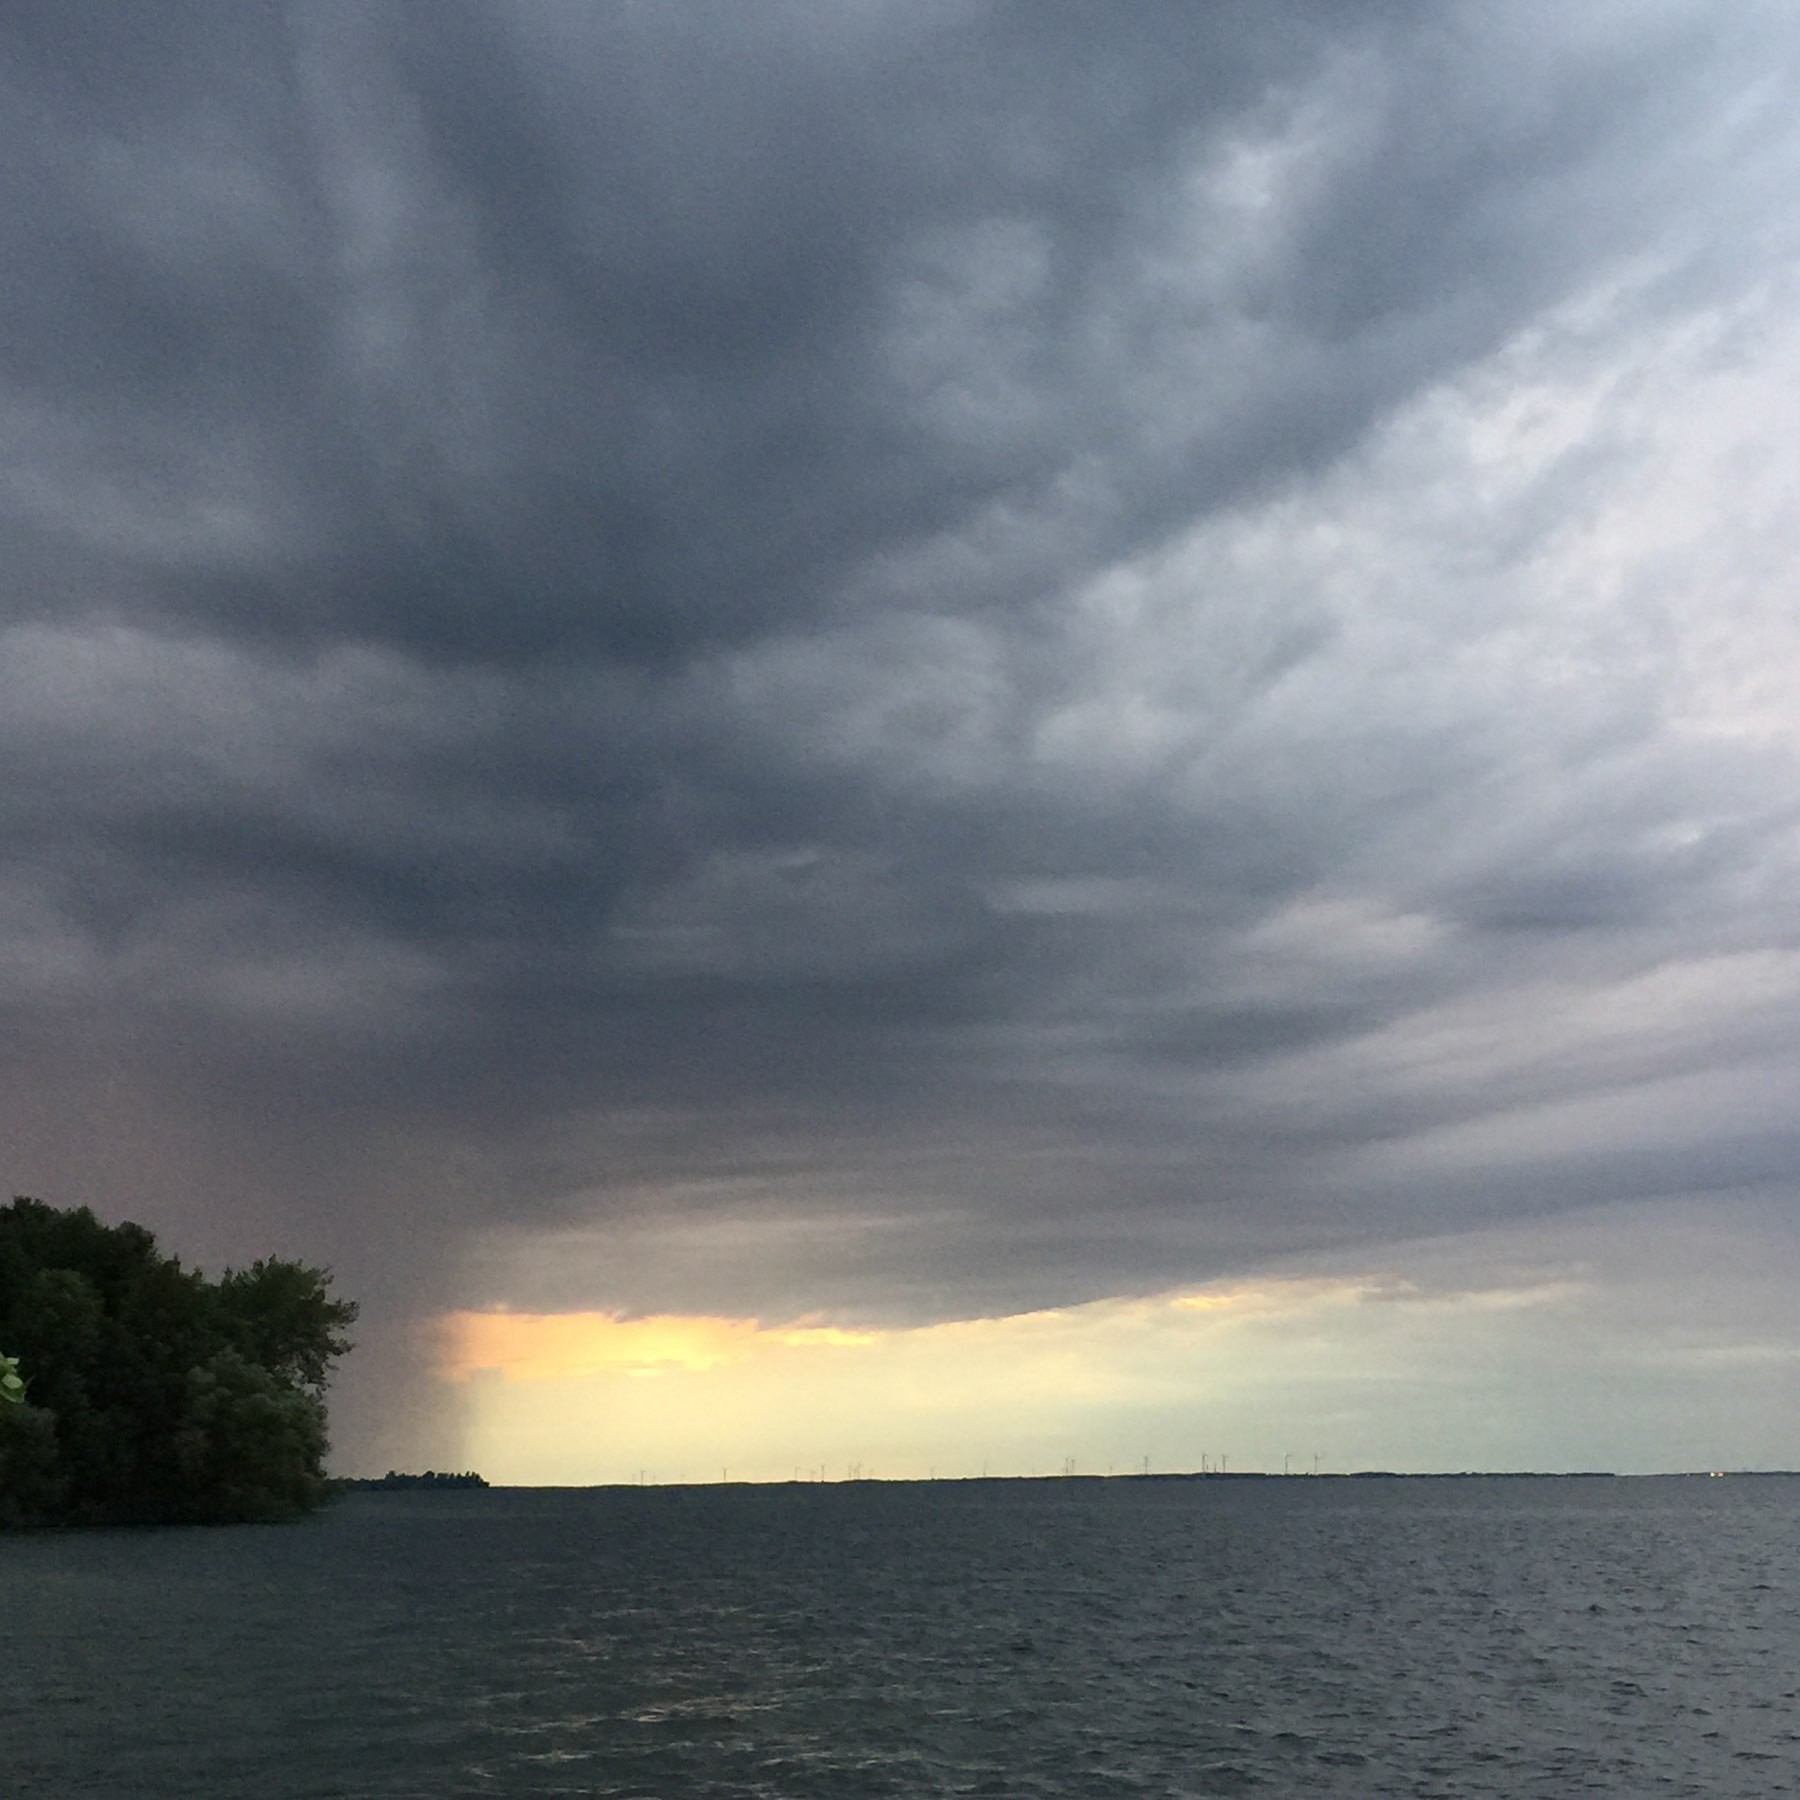 Rain in the distance over Lake Ontario